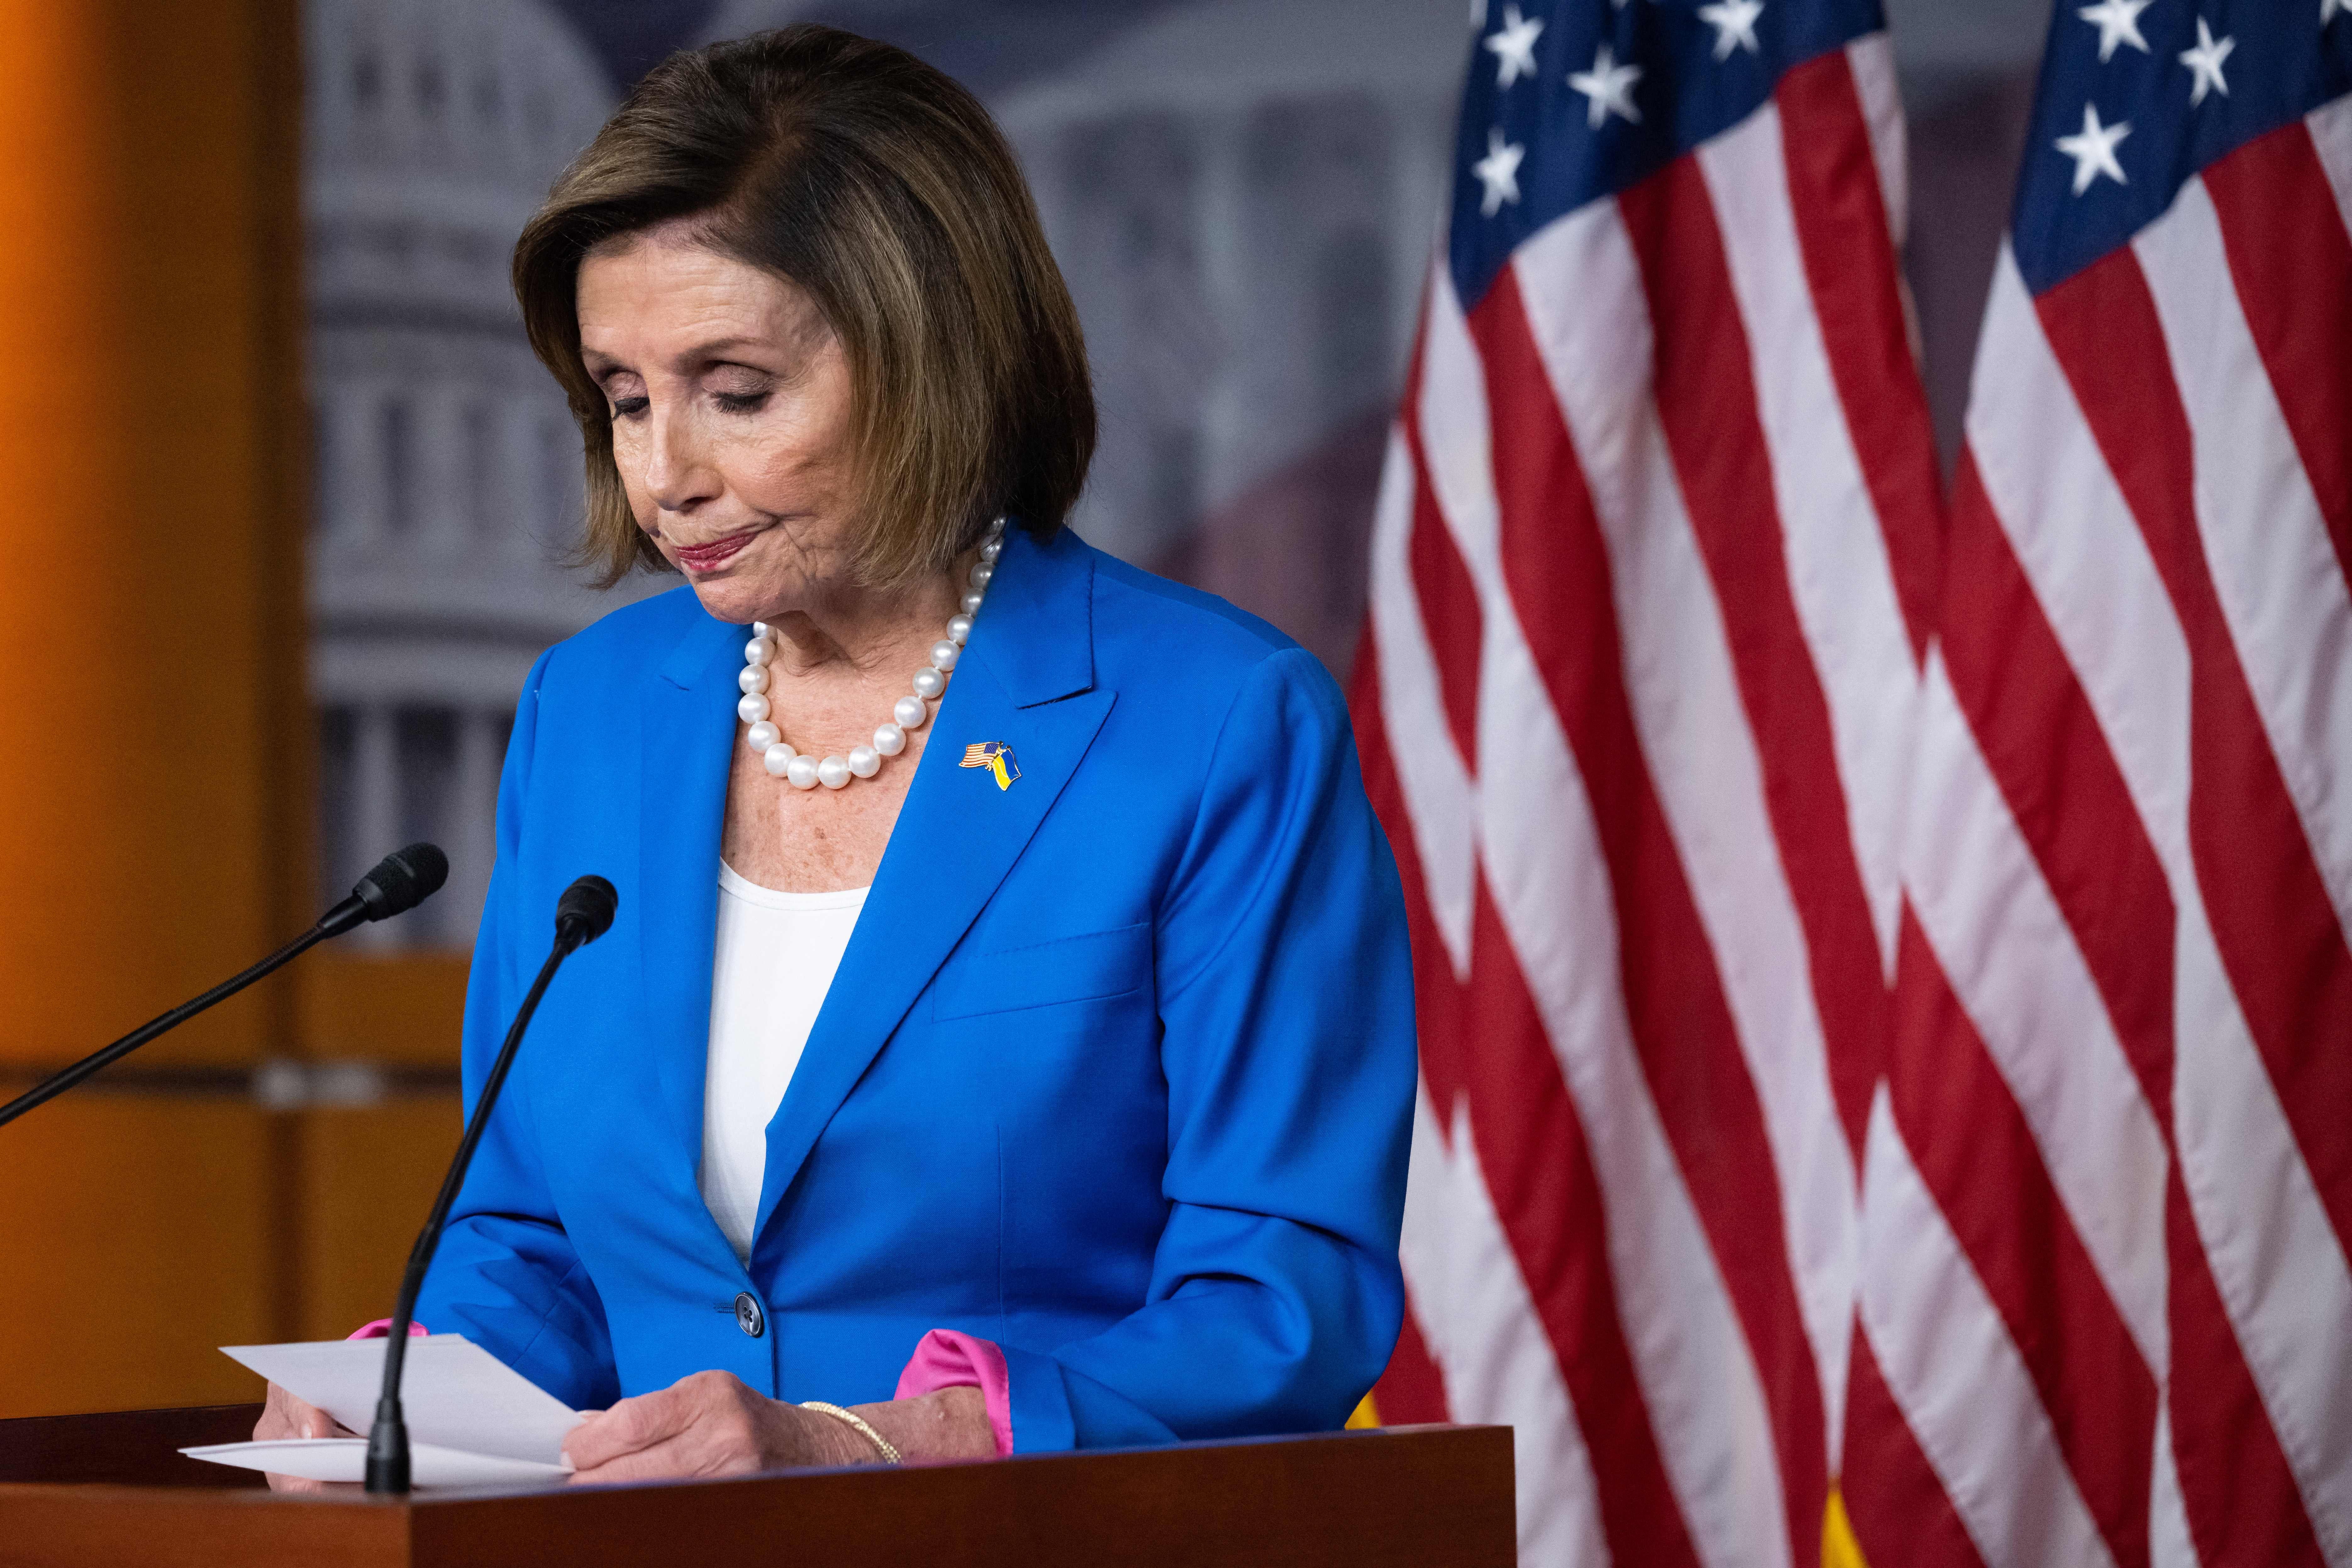 Pelosi looks down at her notes as she stands behind a podium.